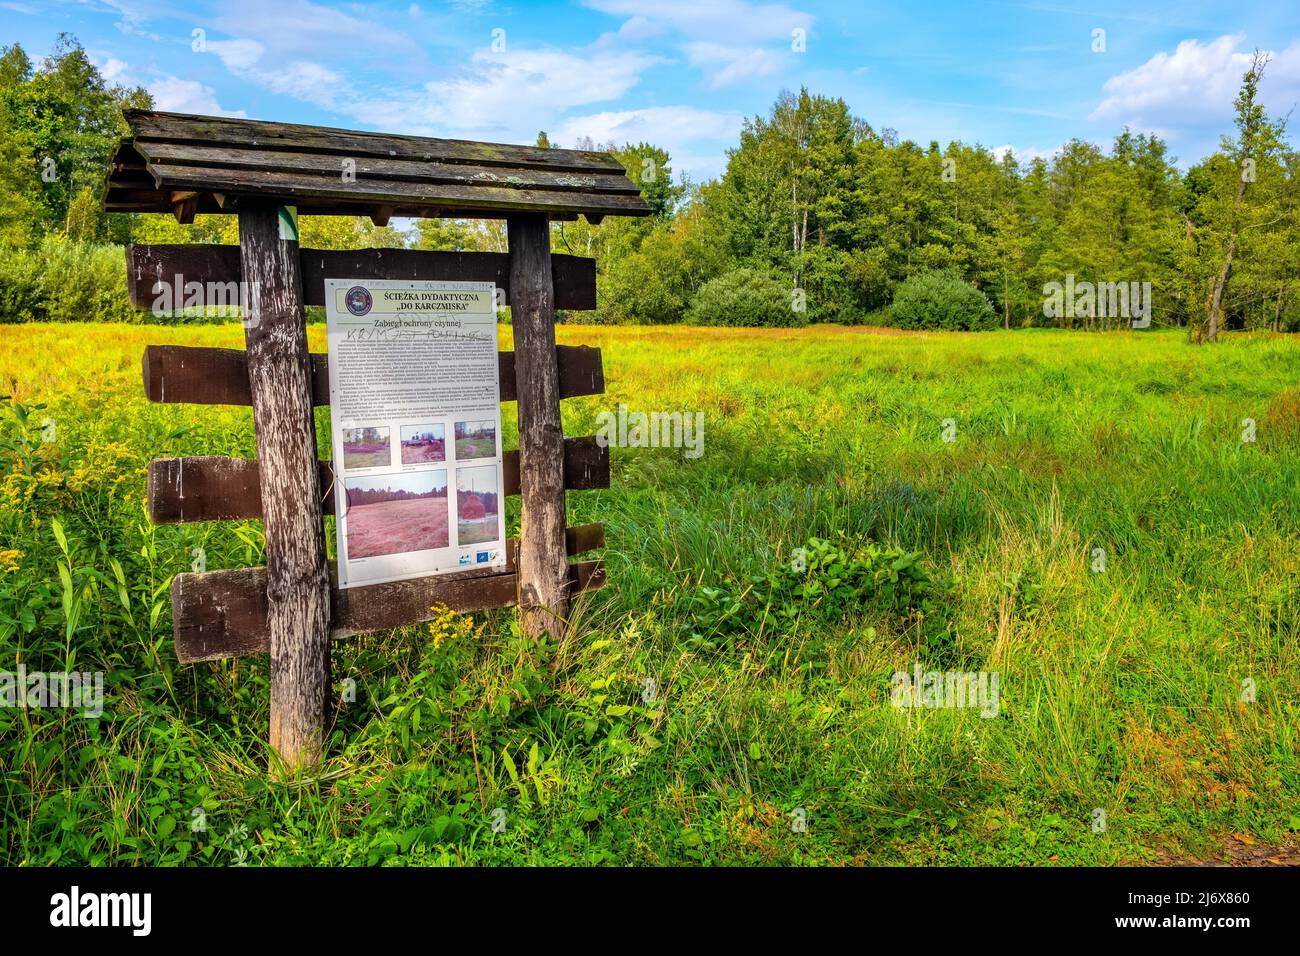 Warsaw, Poland - September 20, 2020: Summer landscape of Puszcza Kampinoska Forest National Park with educational guide board in Truskaw village in Ma Stock Photo